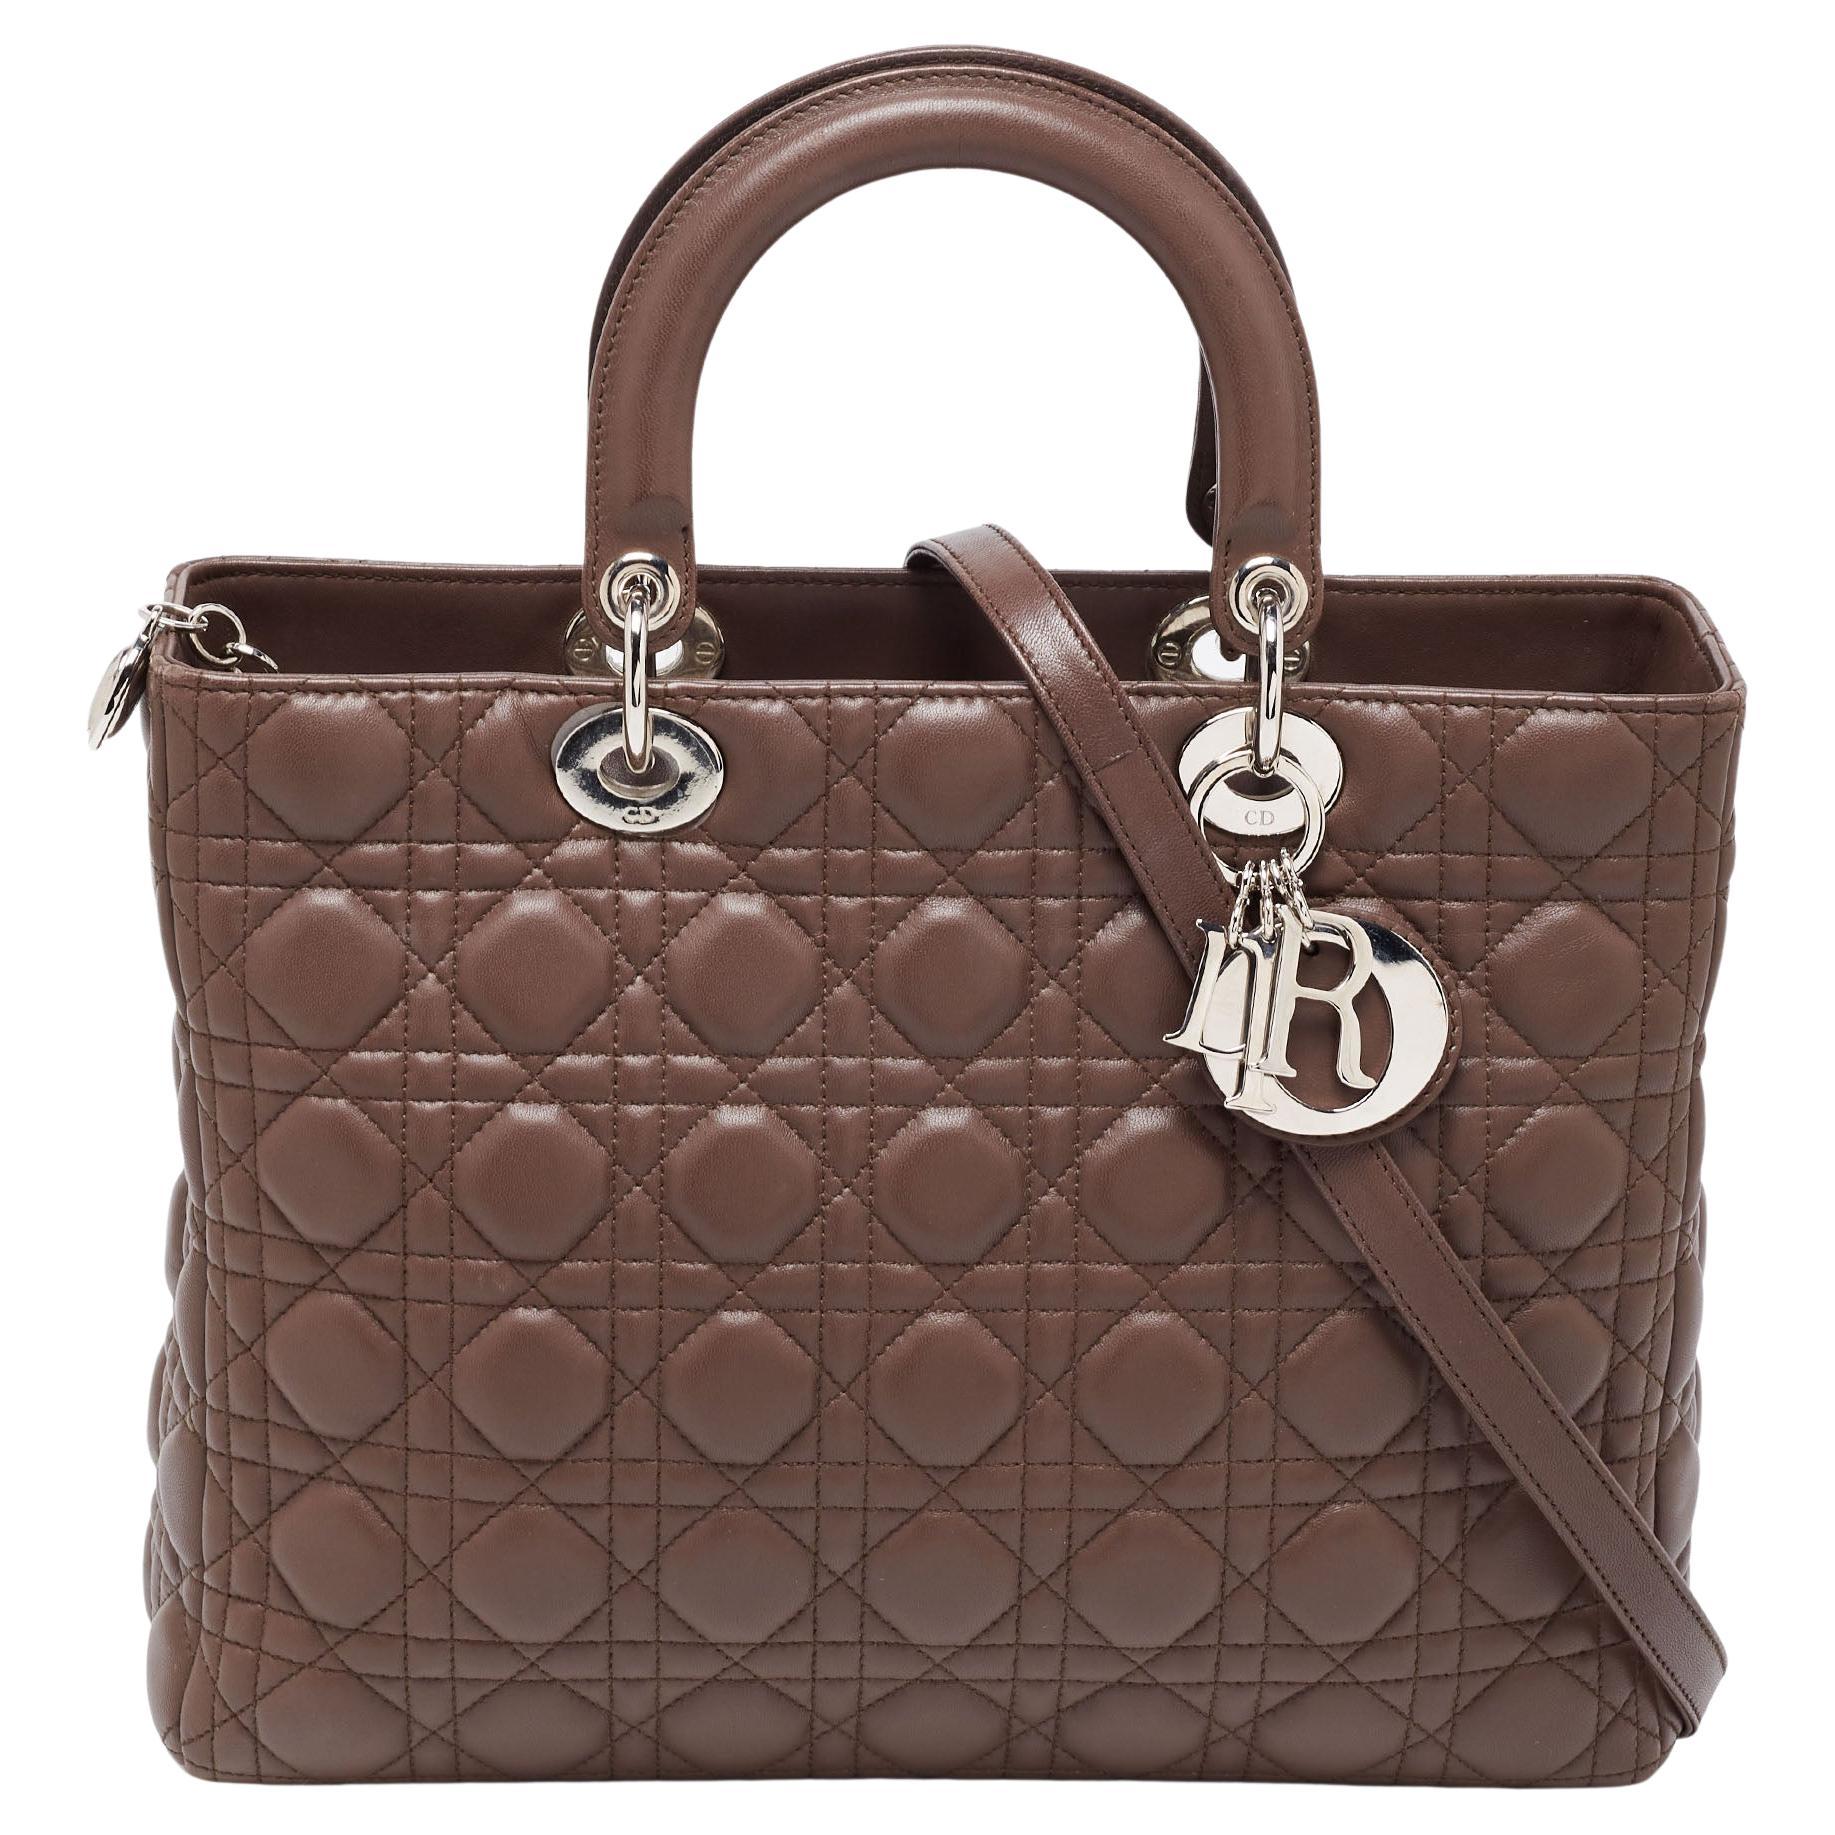 Dior Brown Cannage Leather Large Lady Dior Tote